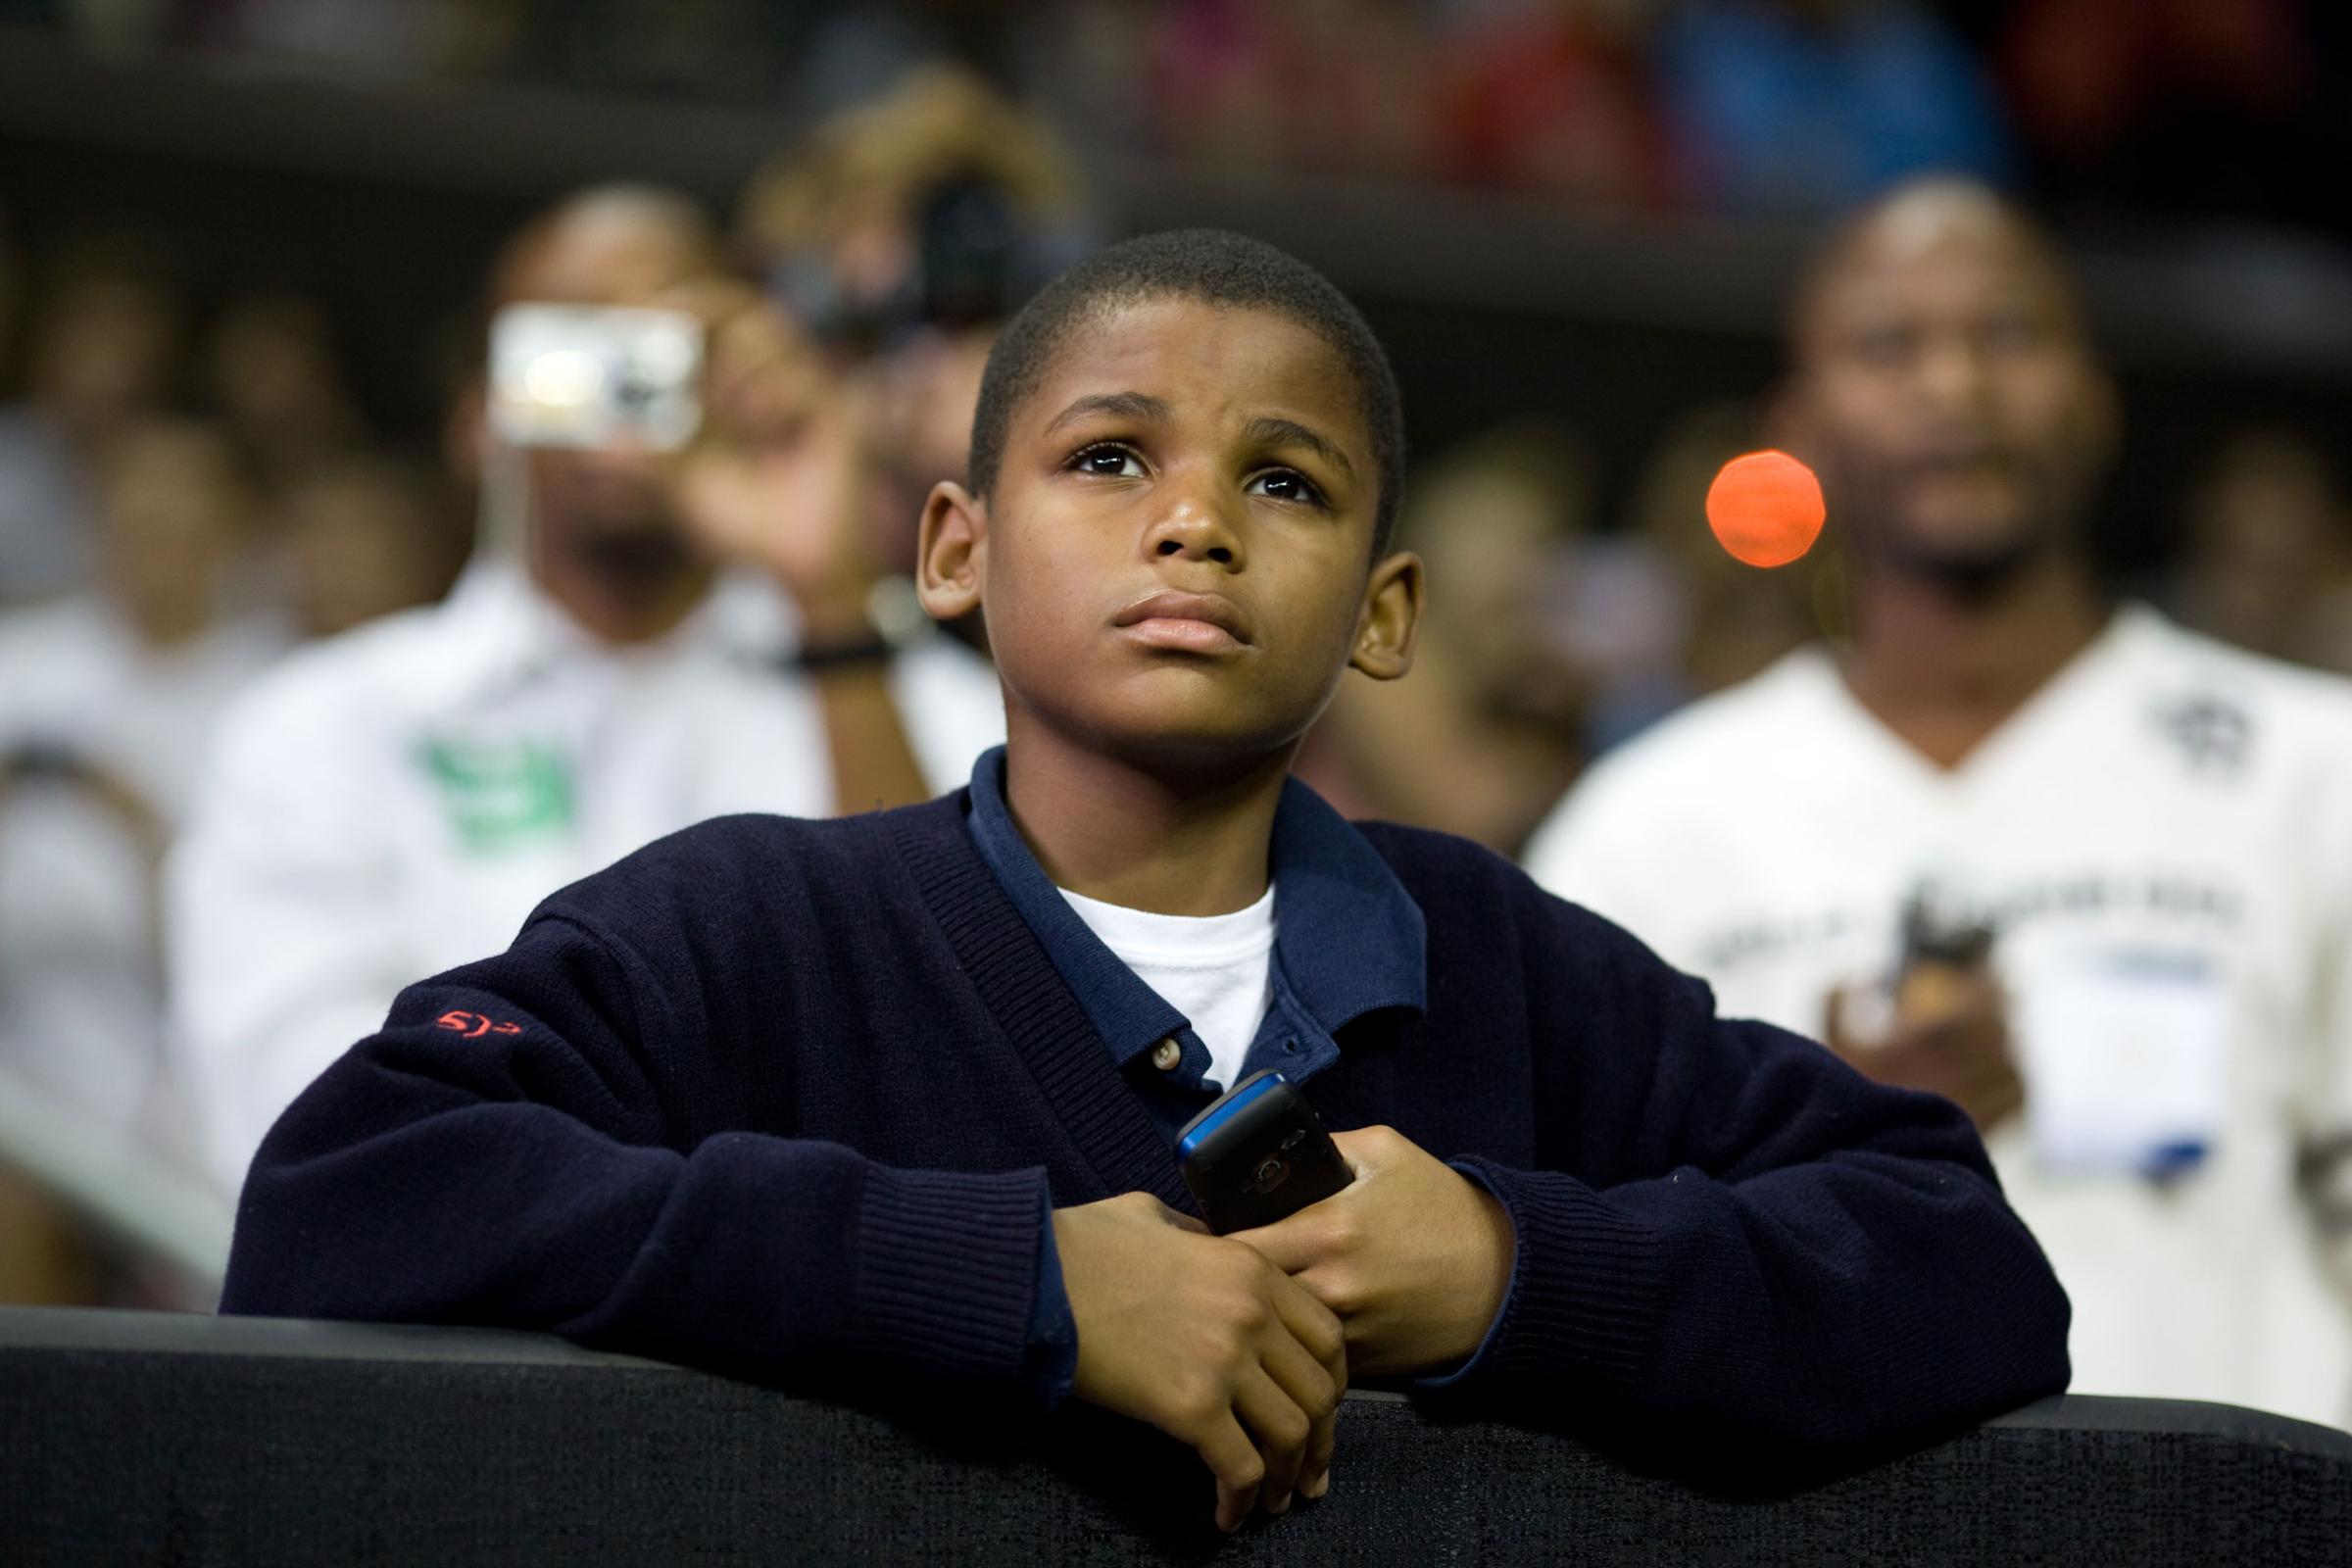 “I was struck by the young boy’s look as he watched the President speak at a health care reform rally at the University of Maryland in College Park,”Sept. 17, 2009.